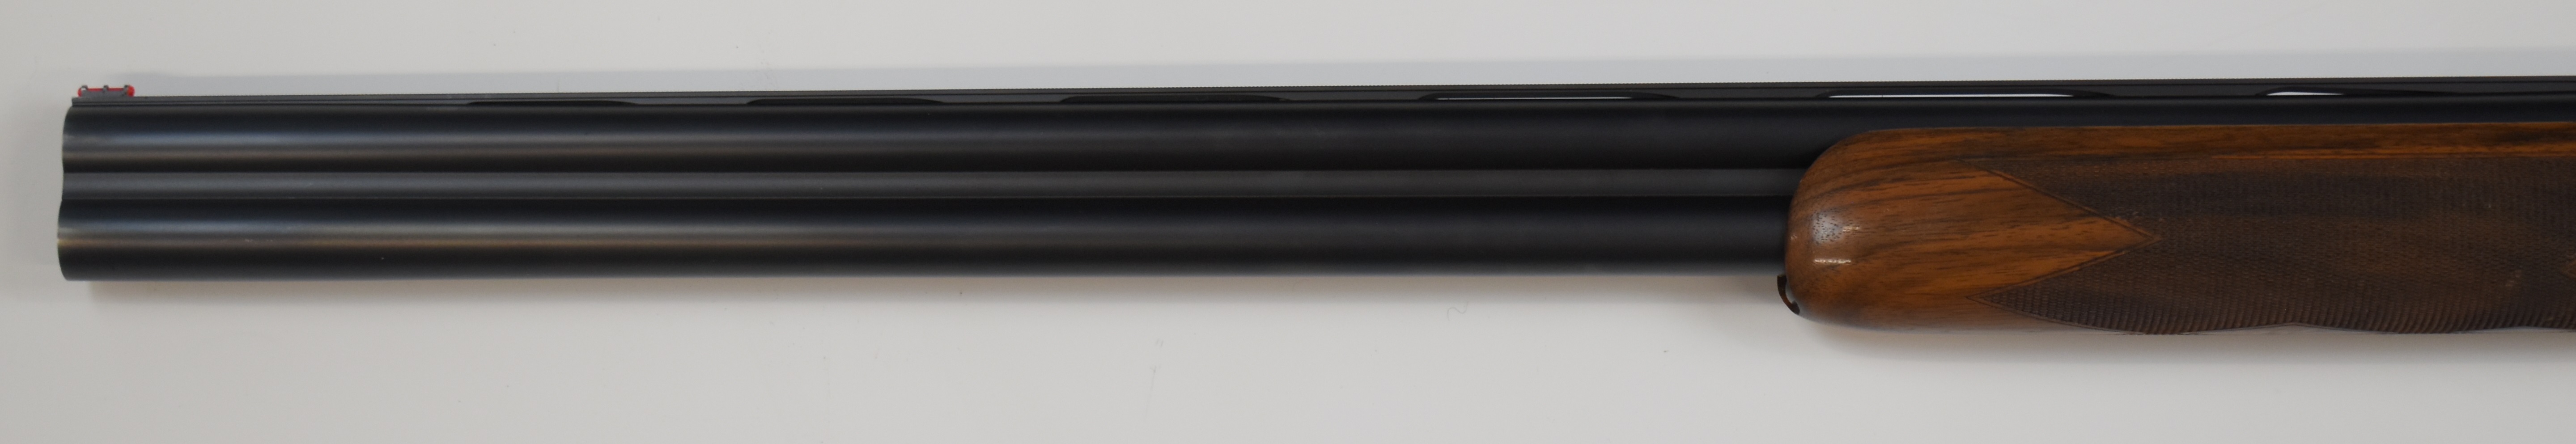 Blaser F16 12 bore over under ejector shotgun with named locks and underside, chequered semi- - Image 21 of 22